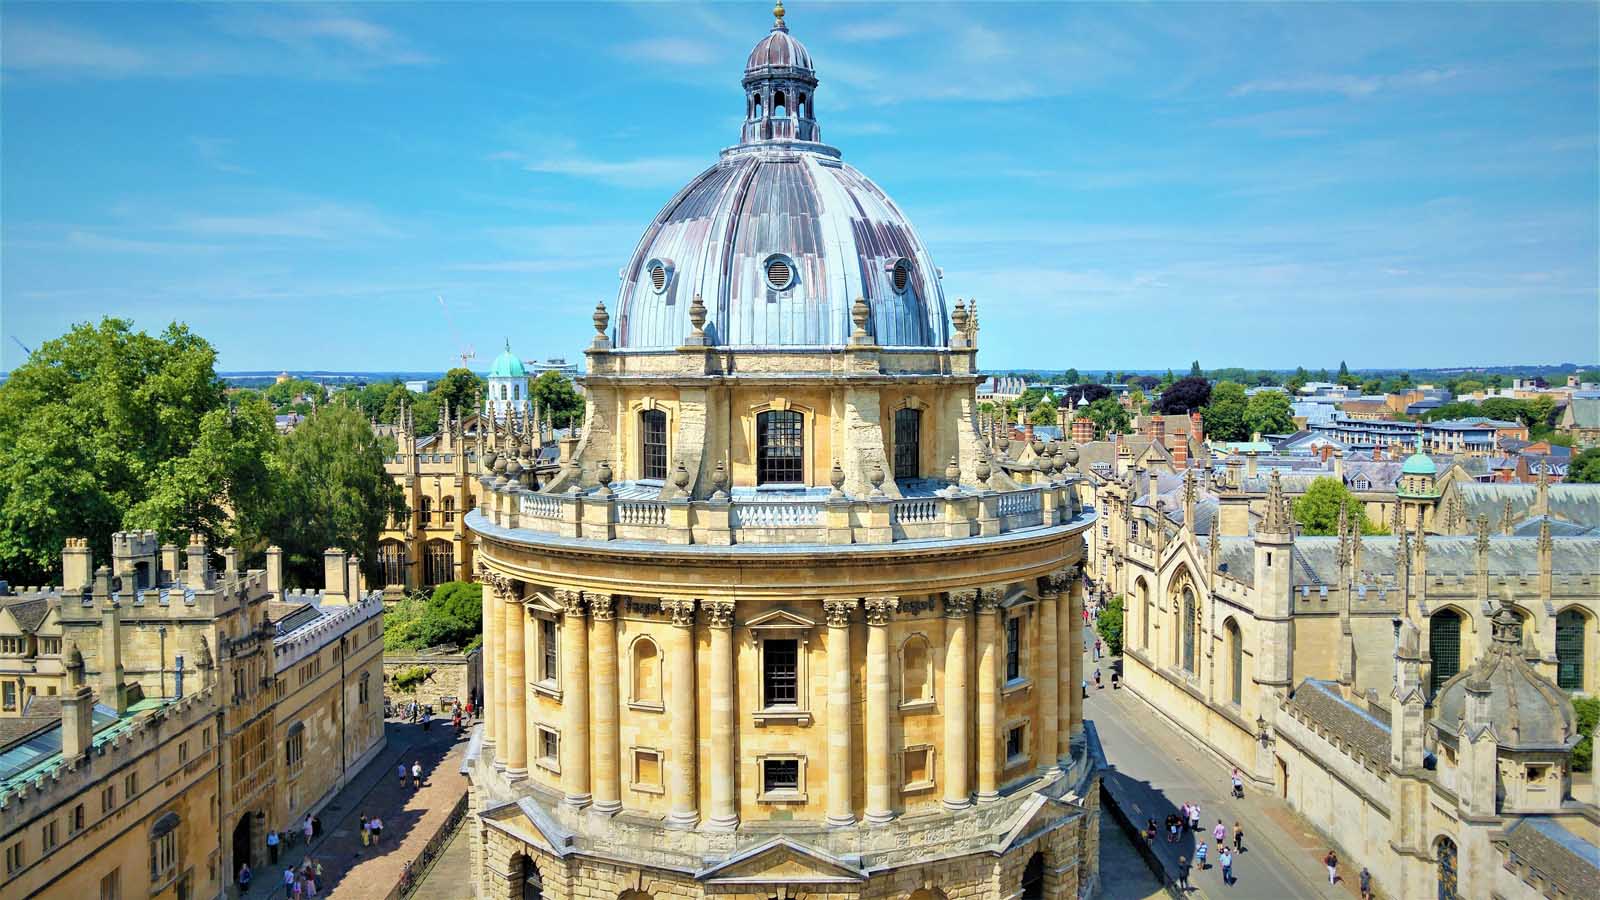 City of Oxford in England